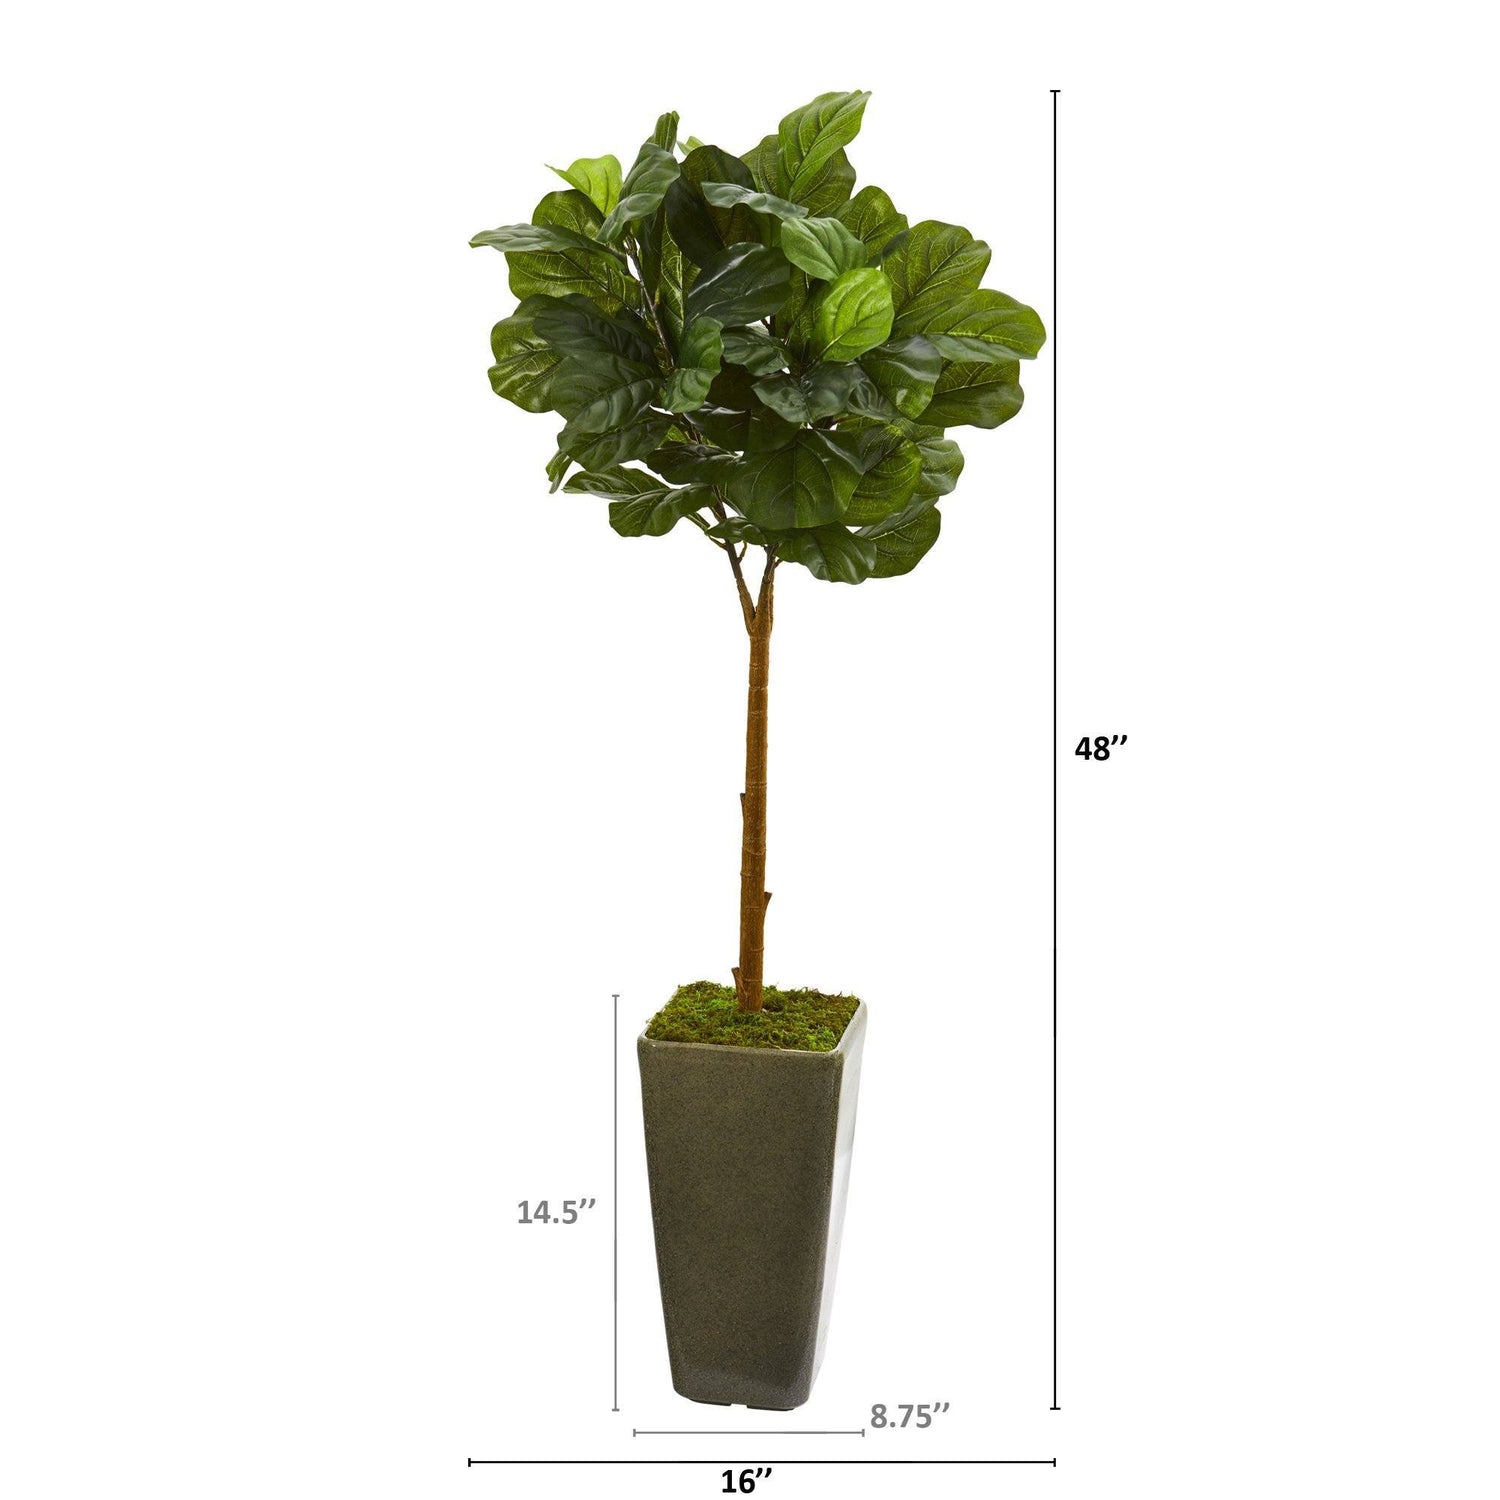 4’ Fiddle Leaf Artificial Tree in Green Planter (Real Touch)